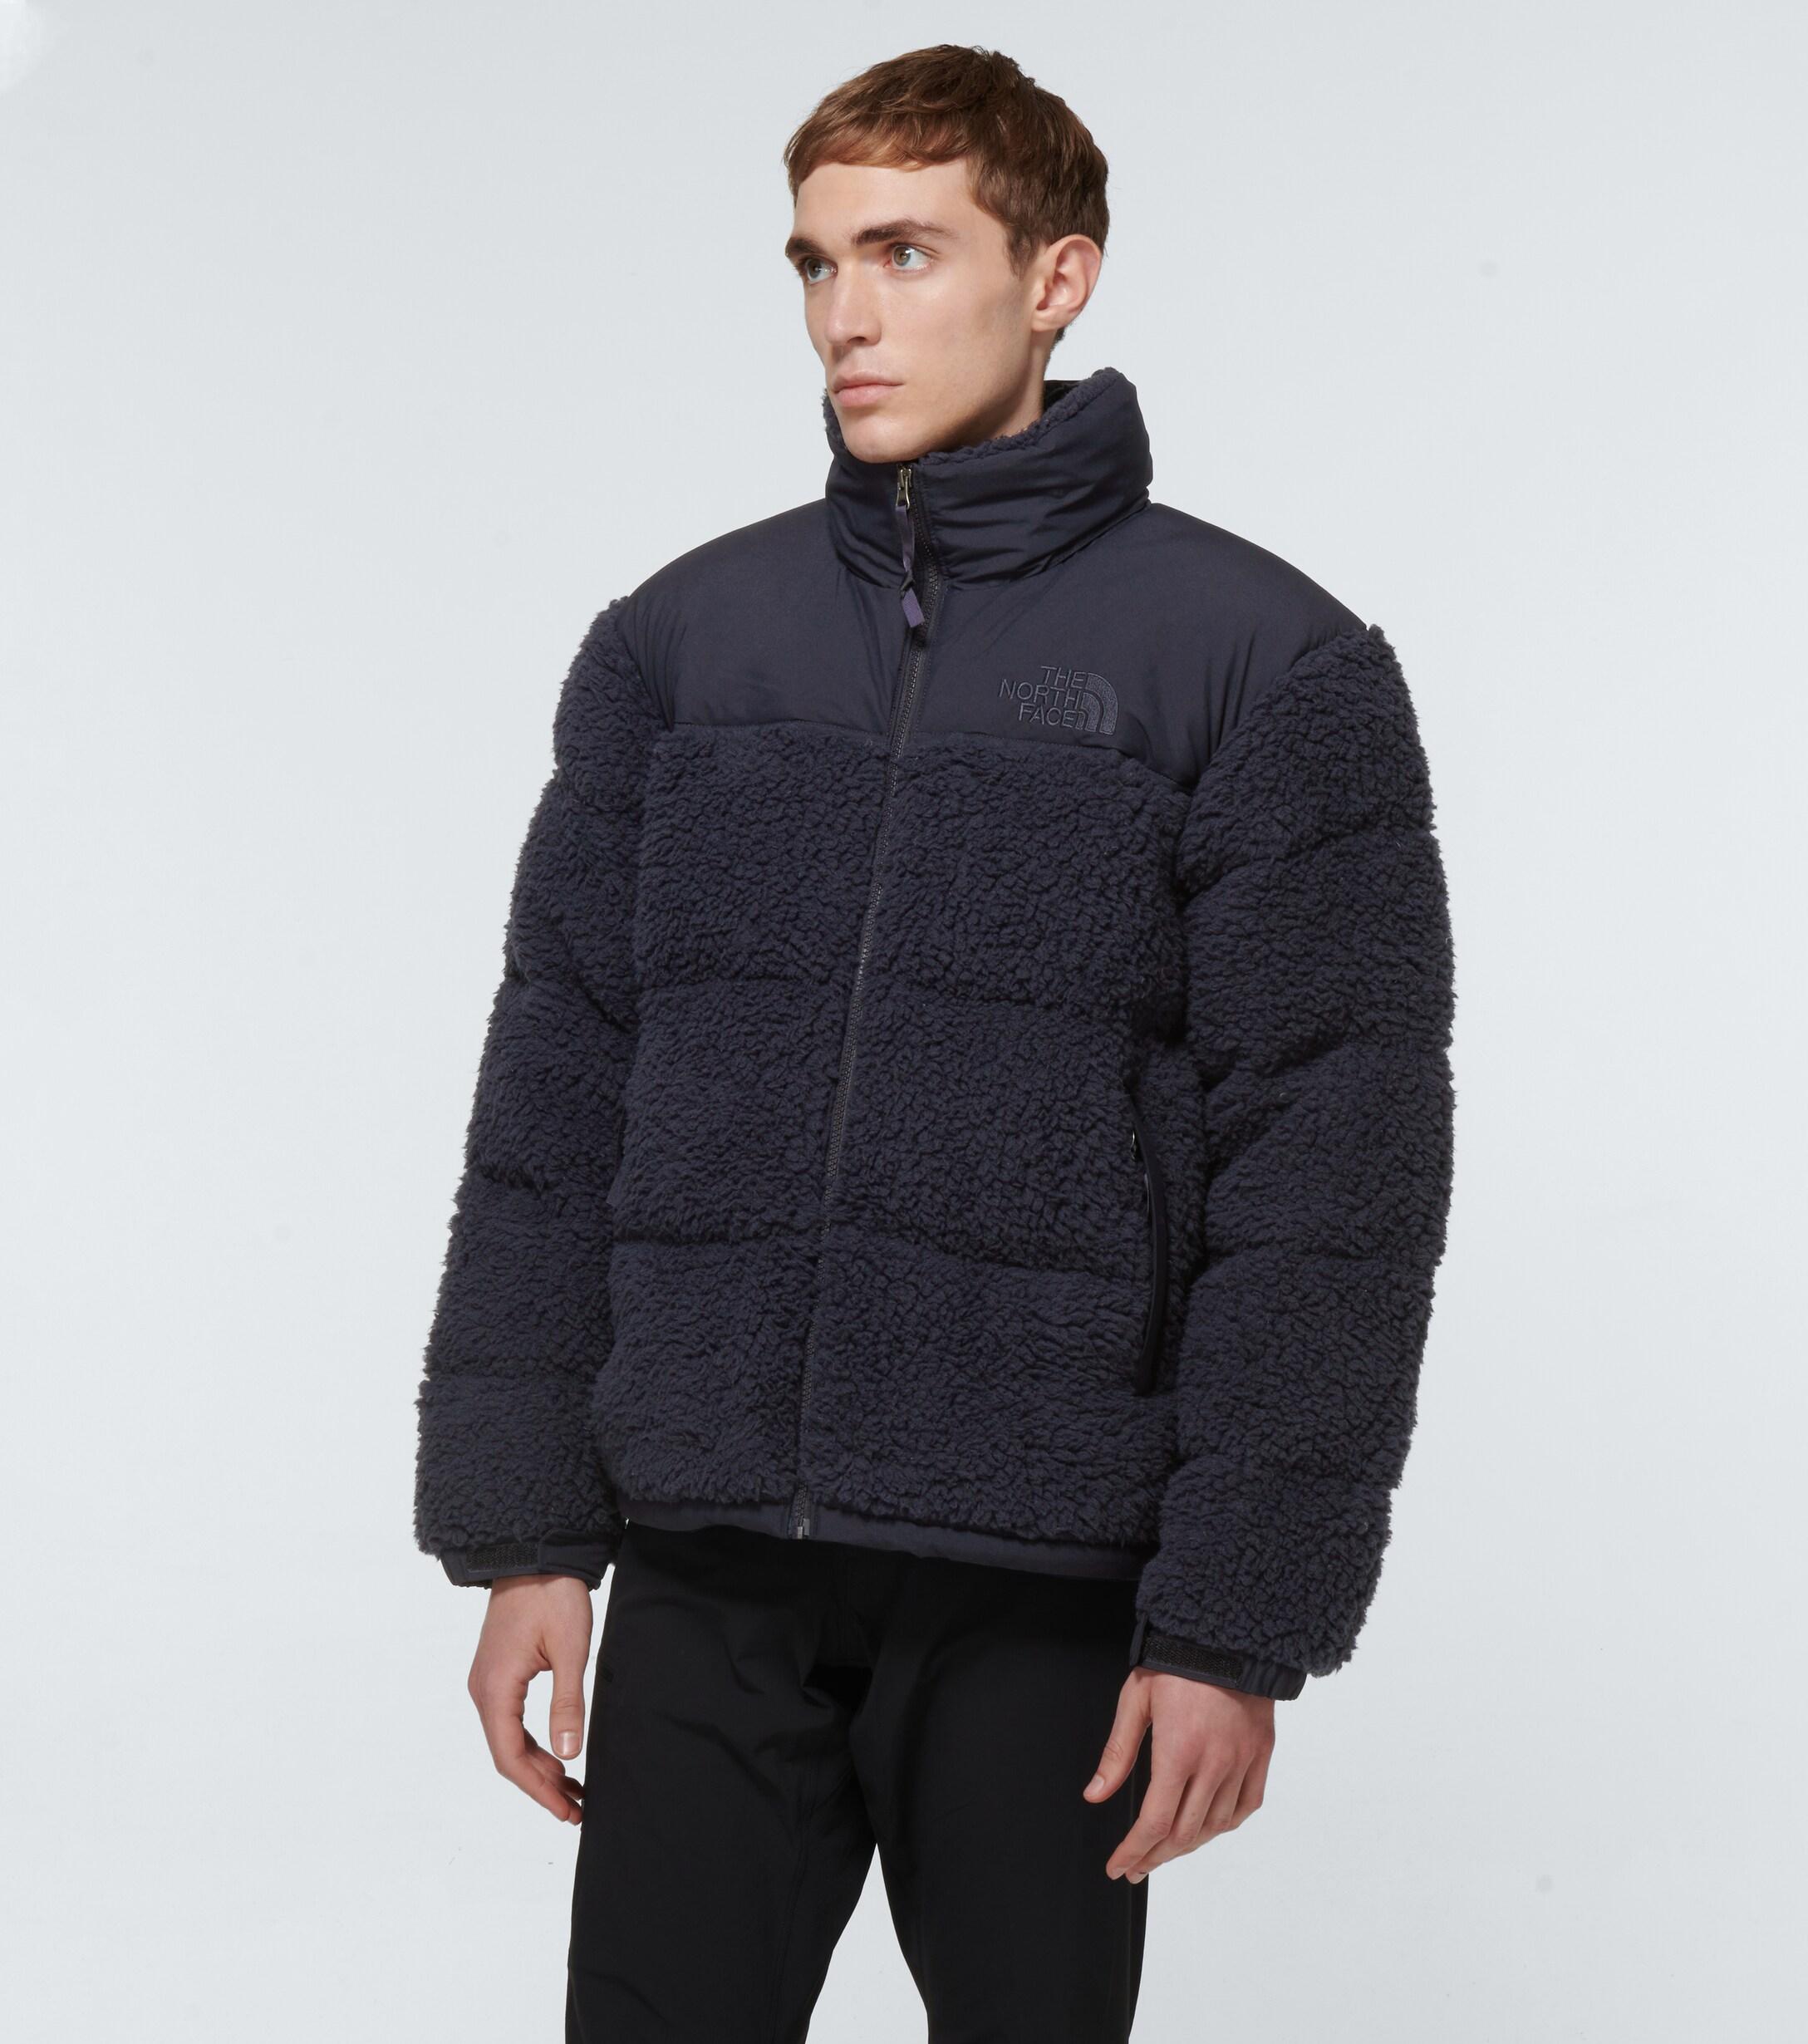 The North Face Sherpa Nuptse Fleece Jacket in Blue for Men - Lyst